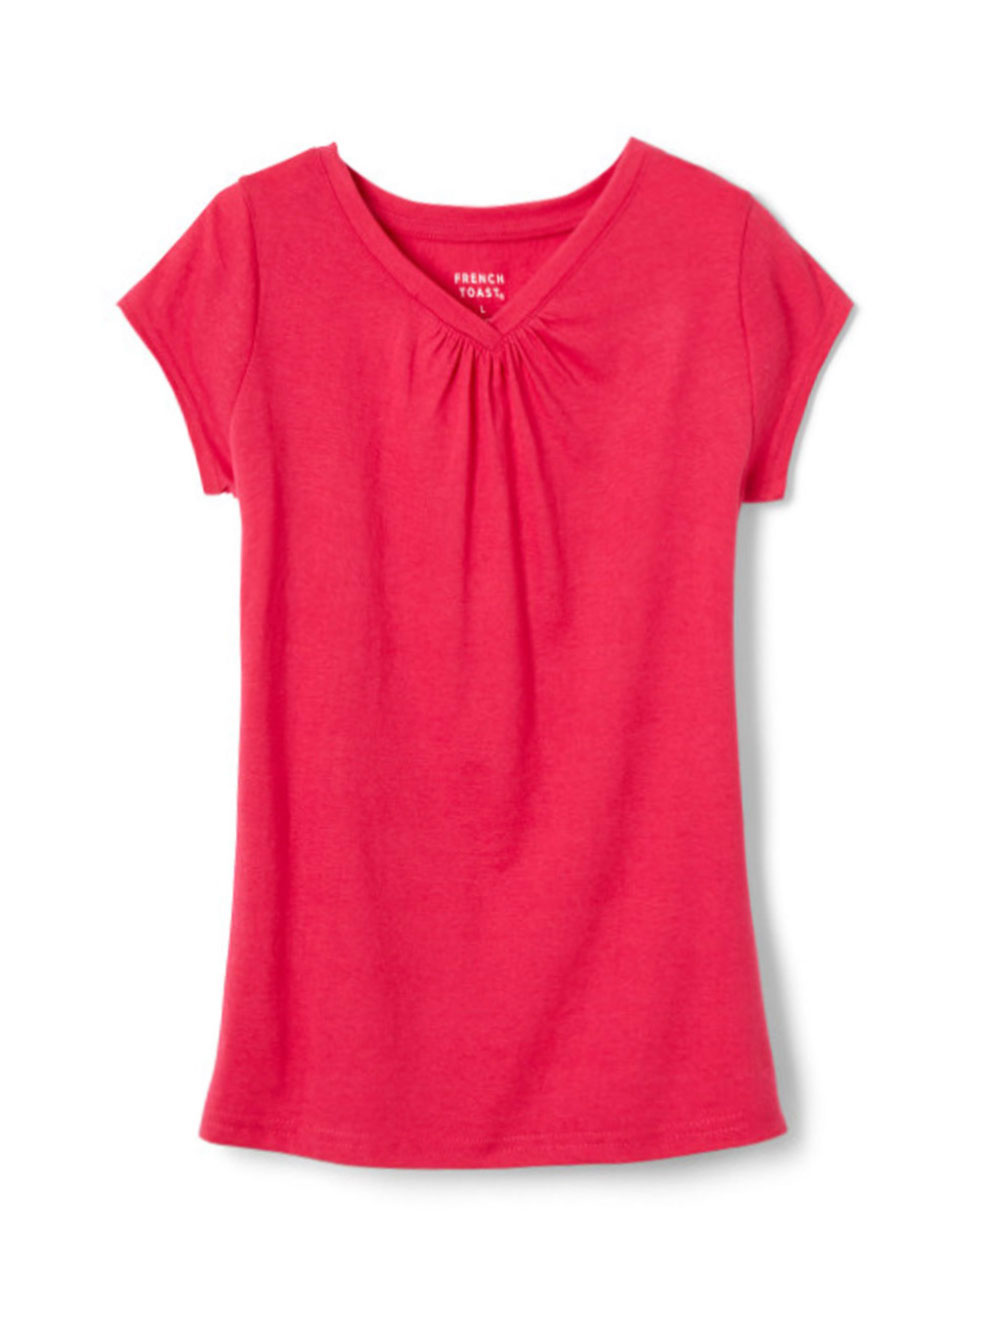 Size 14 T-Shirts for Girls